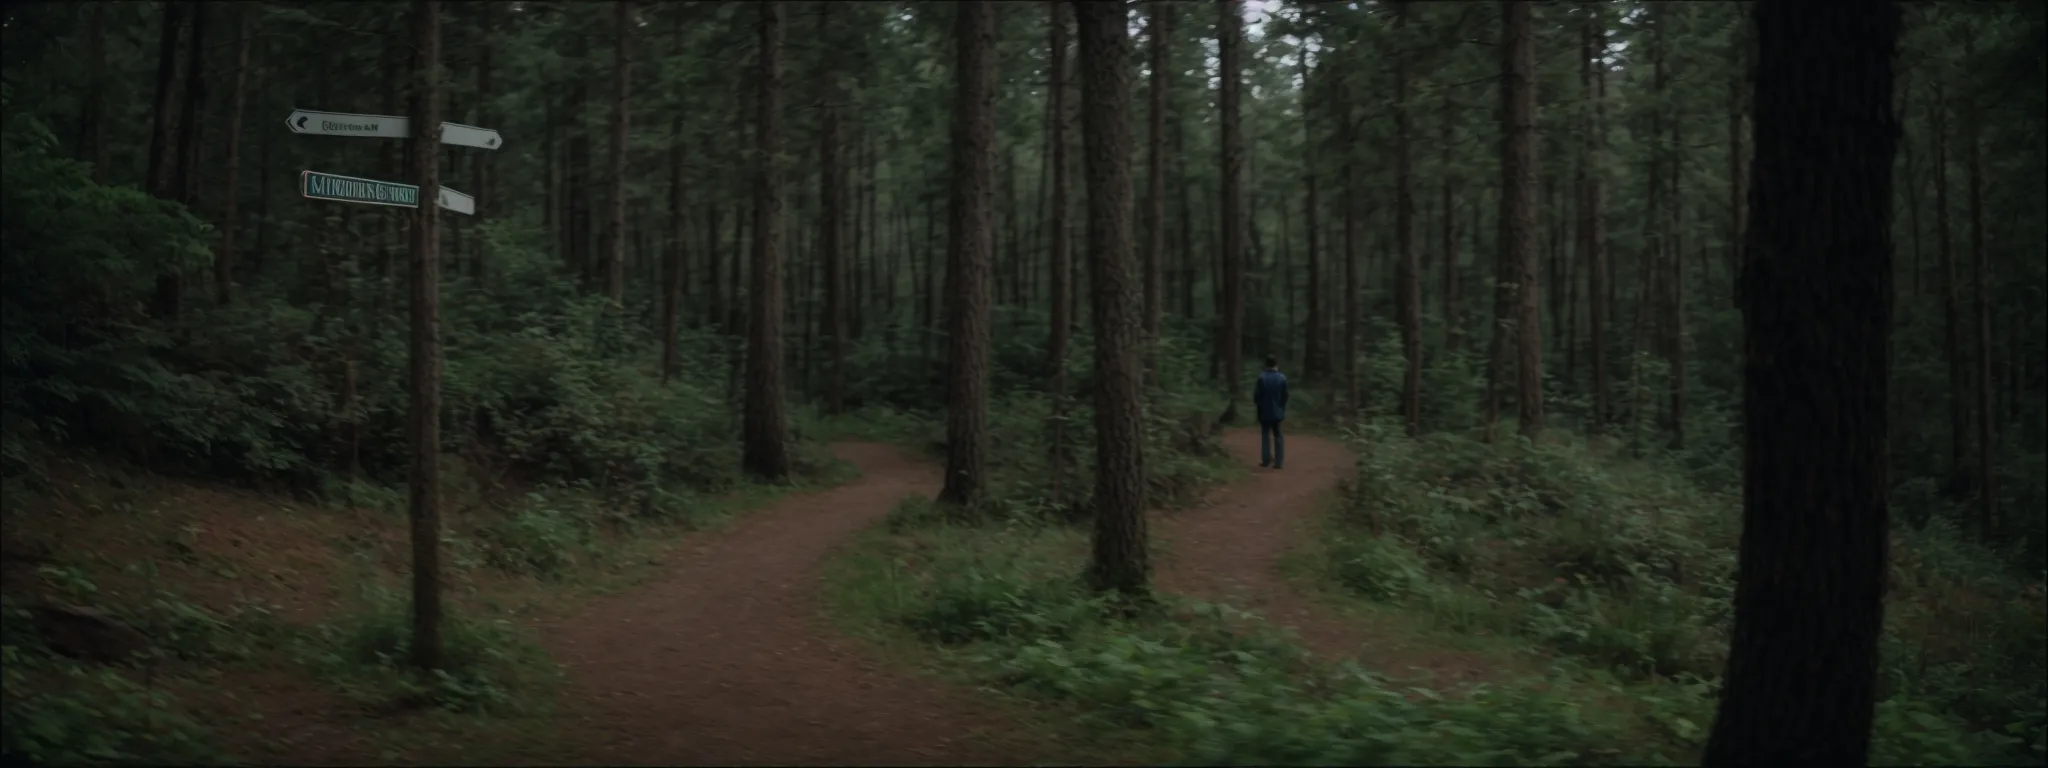 a person standing on a forest path looking intently at a signpost with multiple directions.